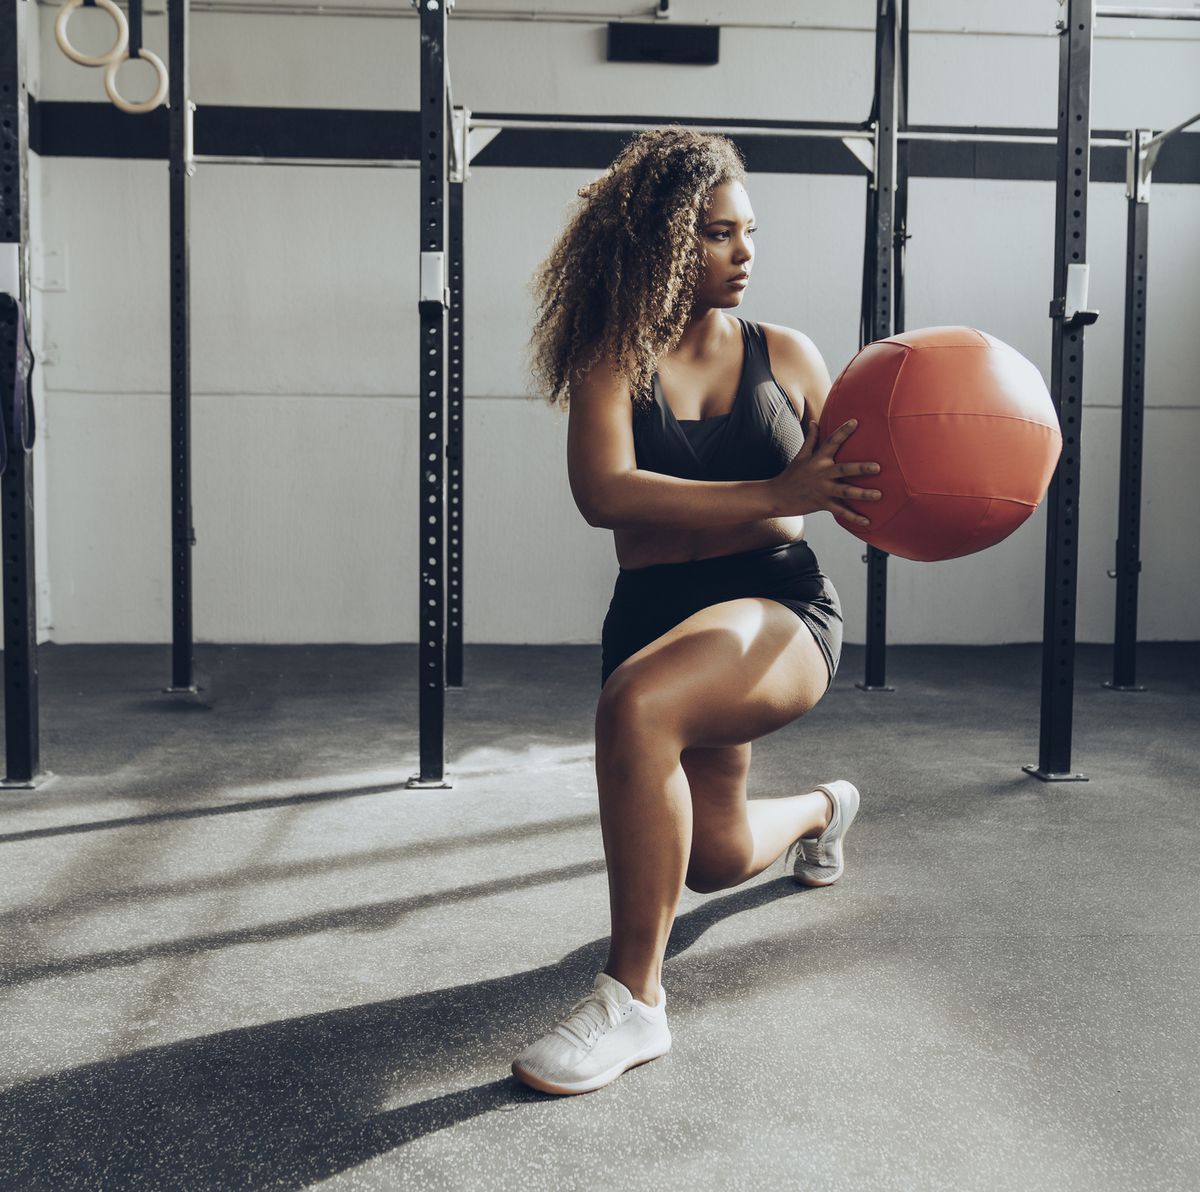 26 Best Fitness Tips For Building Muscle, Weight Loss, And More